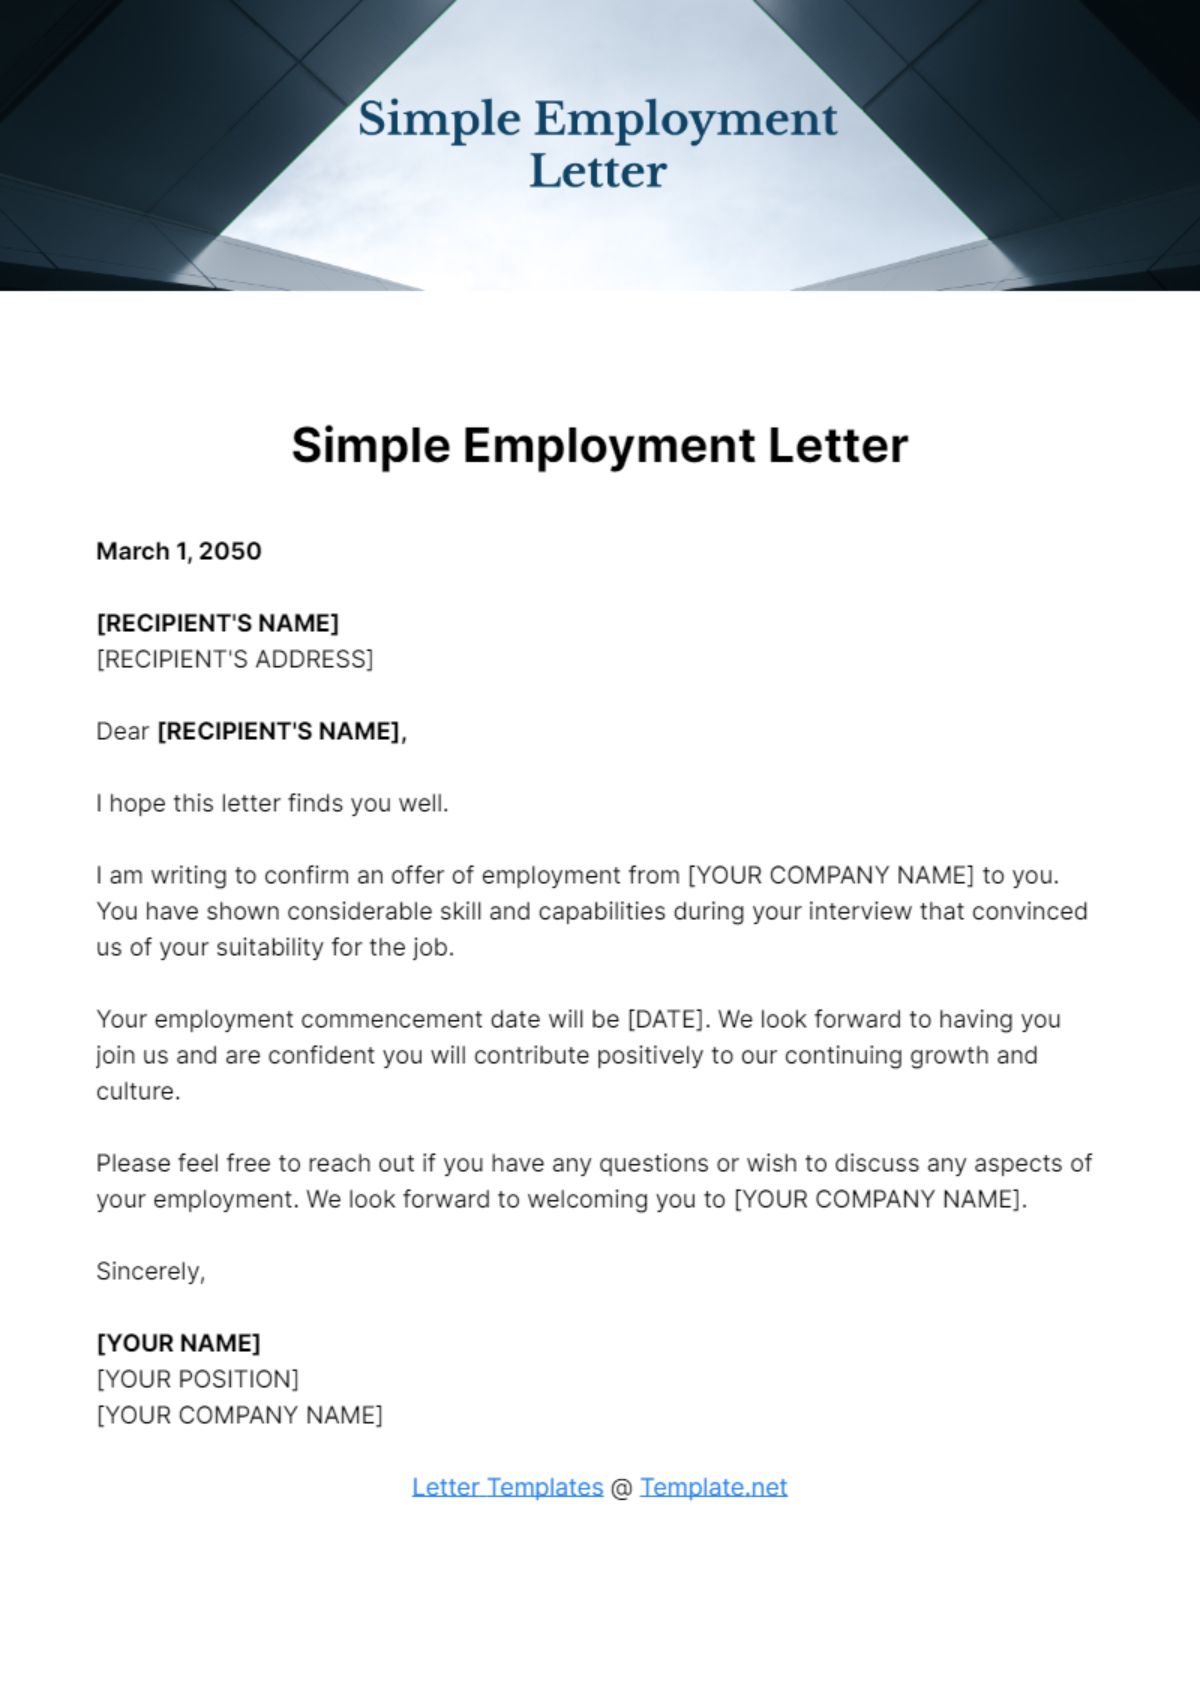 Free Simple Employment Letter Template